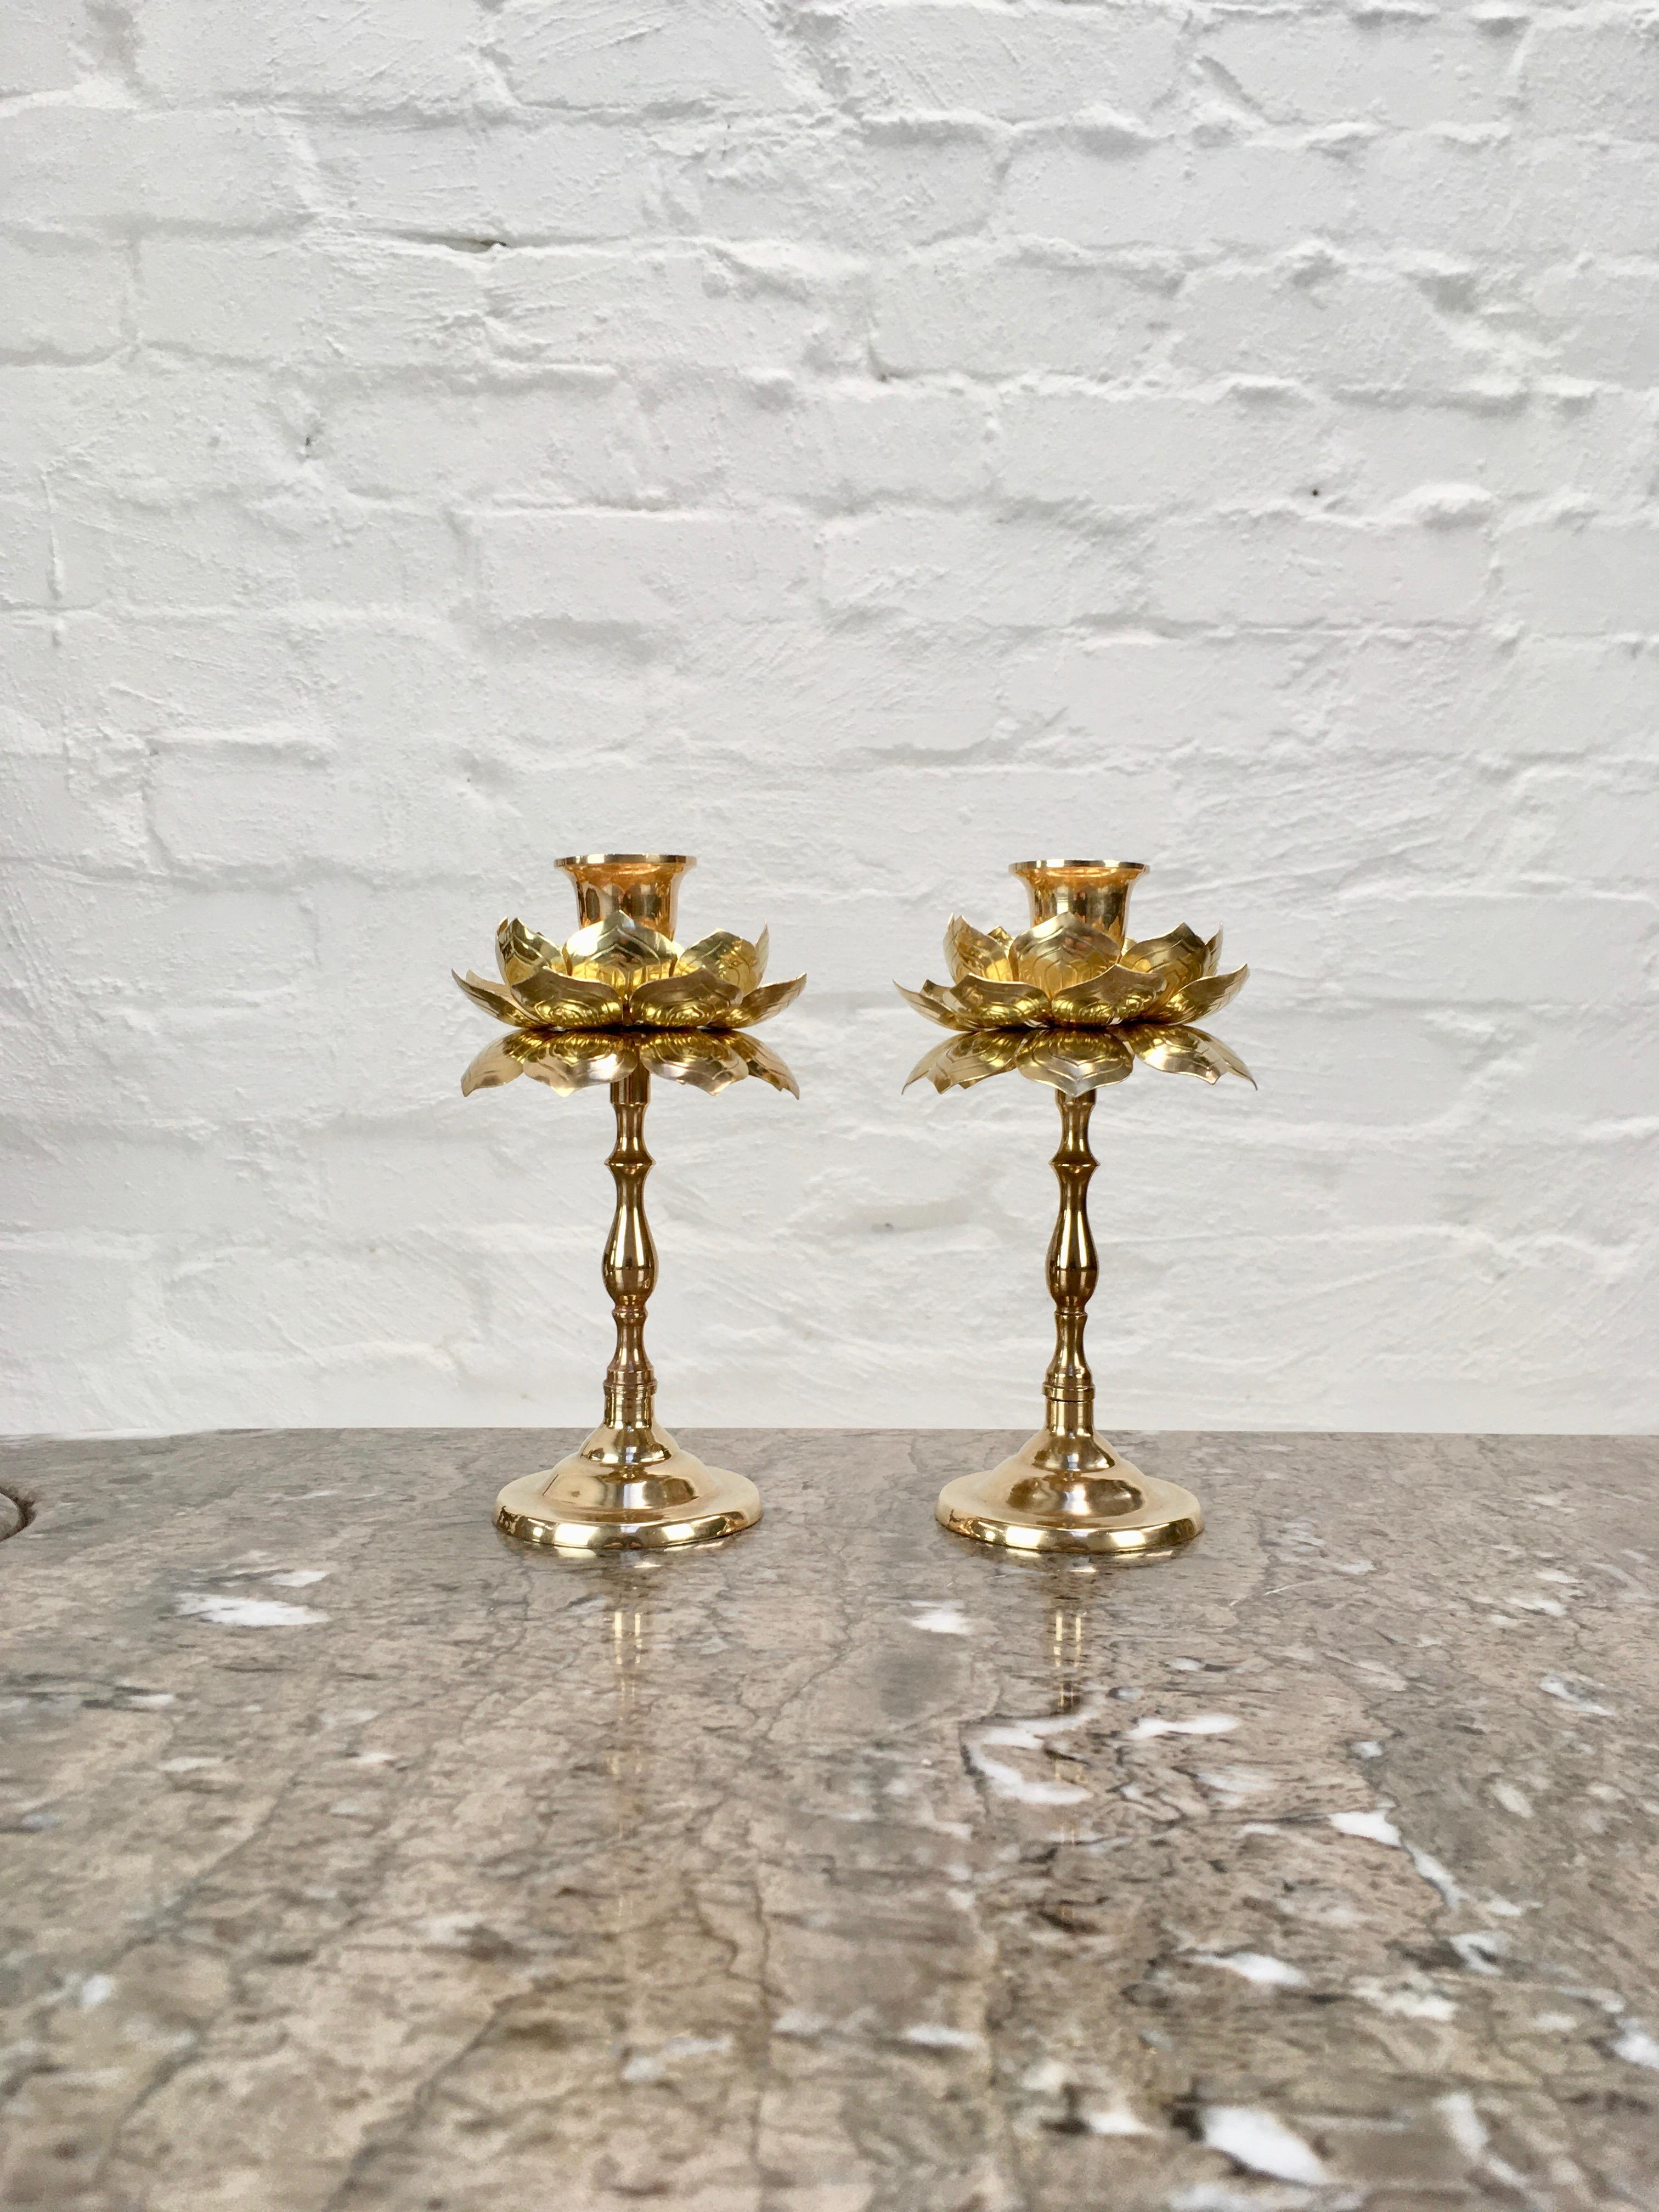 A pair of stemmed candleholders by Feldman. A compact size, at 3.5 inches diameter and 6.3 inches high. See images, comparing them to a standard sized champagne bottle.

As a table centrepiece or on a sideboard, these are spectacular decorative